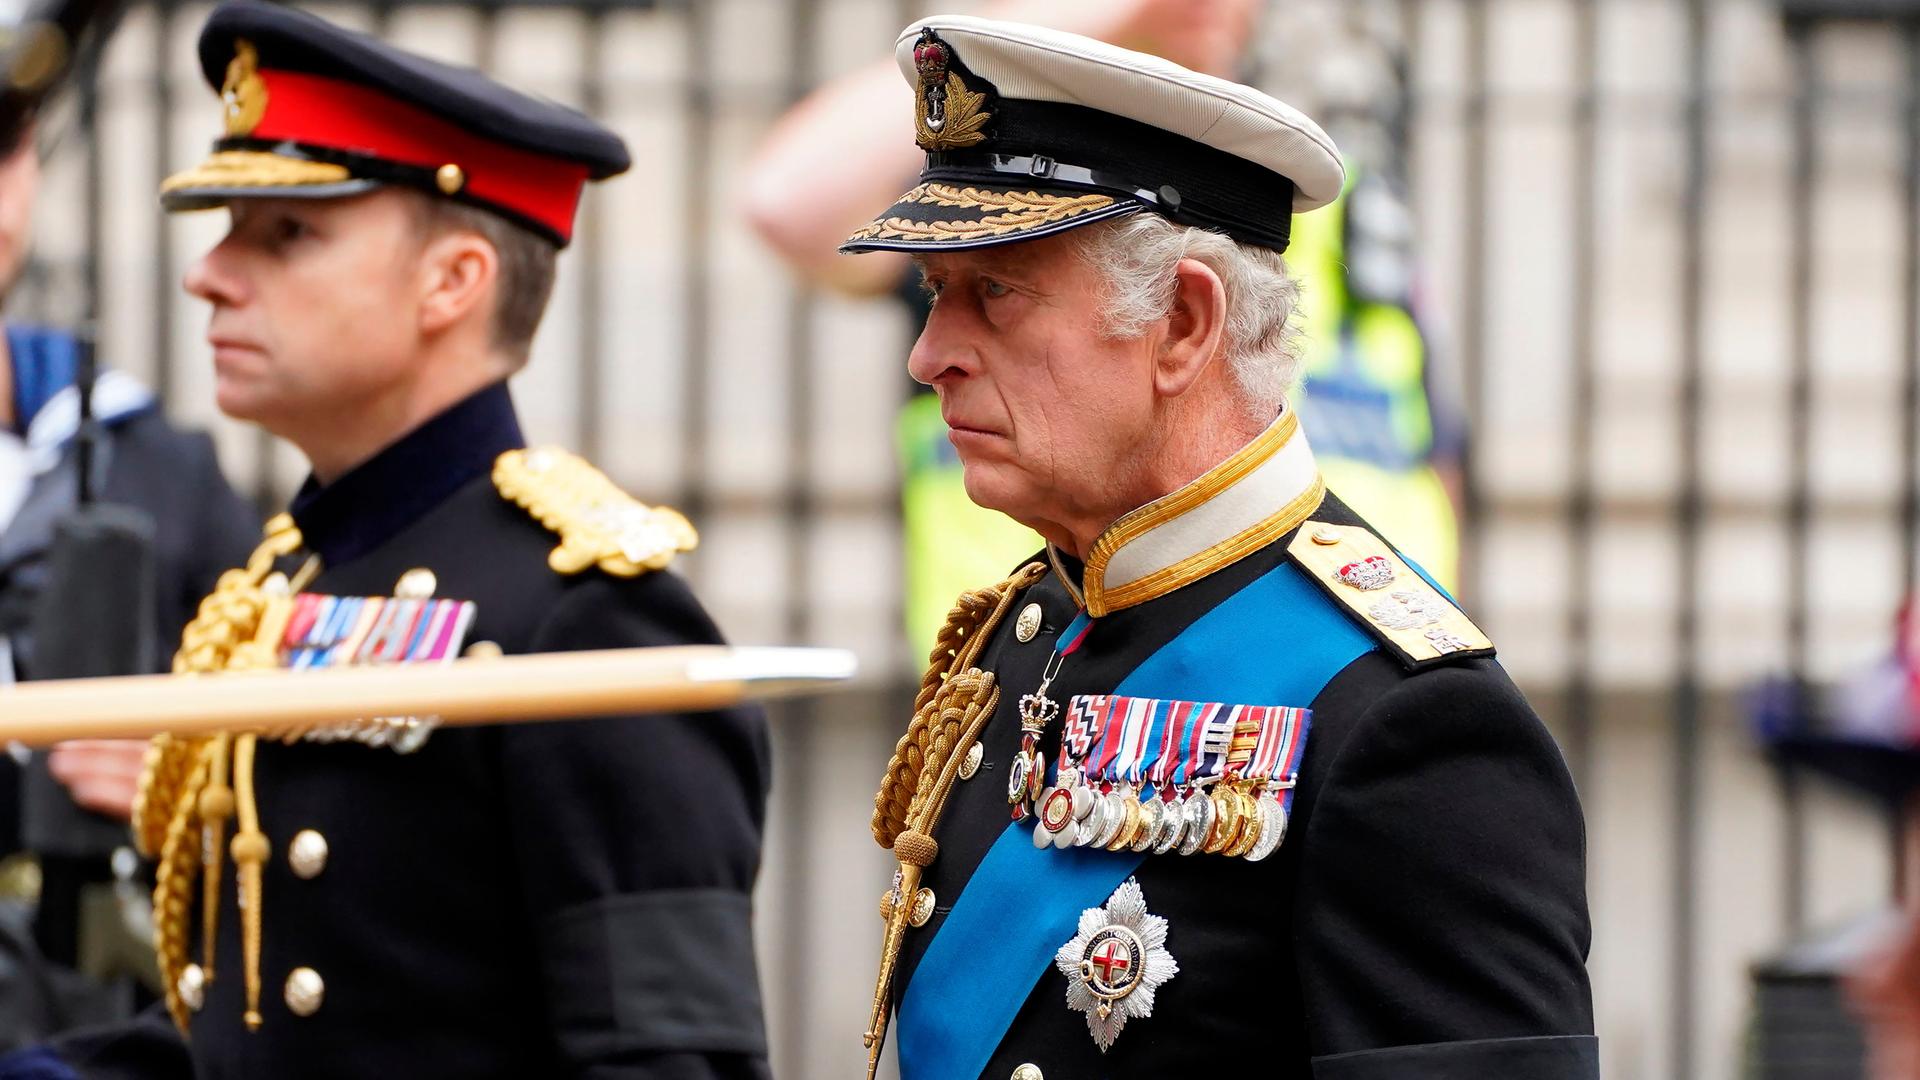 King Charles III, right, arrives at Westminster Abbey on the day of Queen Elizabeth II funeral in central London, Monday, Sept. 19, 2022. The Queen, who died aged 96 on Sept. 8, will be buried at Windsor alongside her late husband, Prince Philip, who died last year. ( James Manning/Pool Photo via AP)